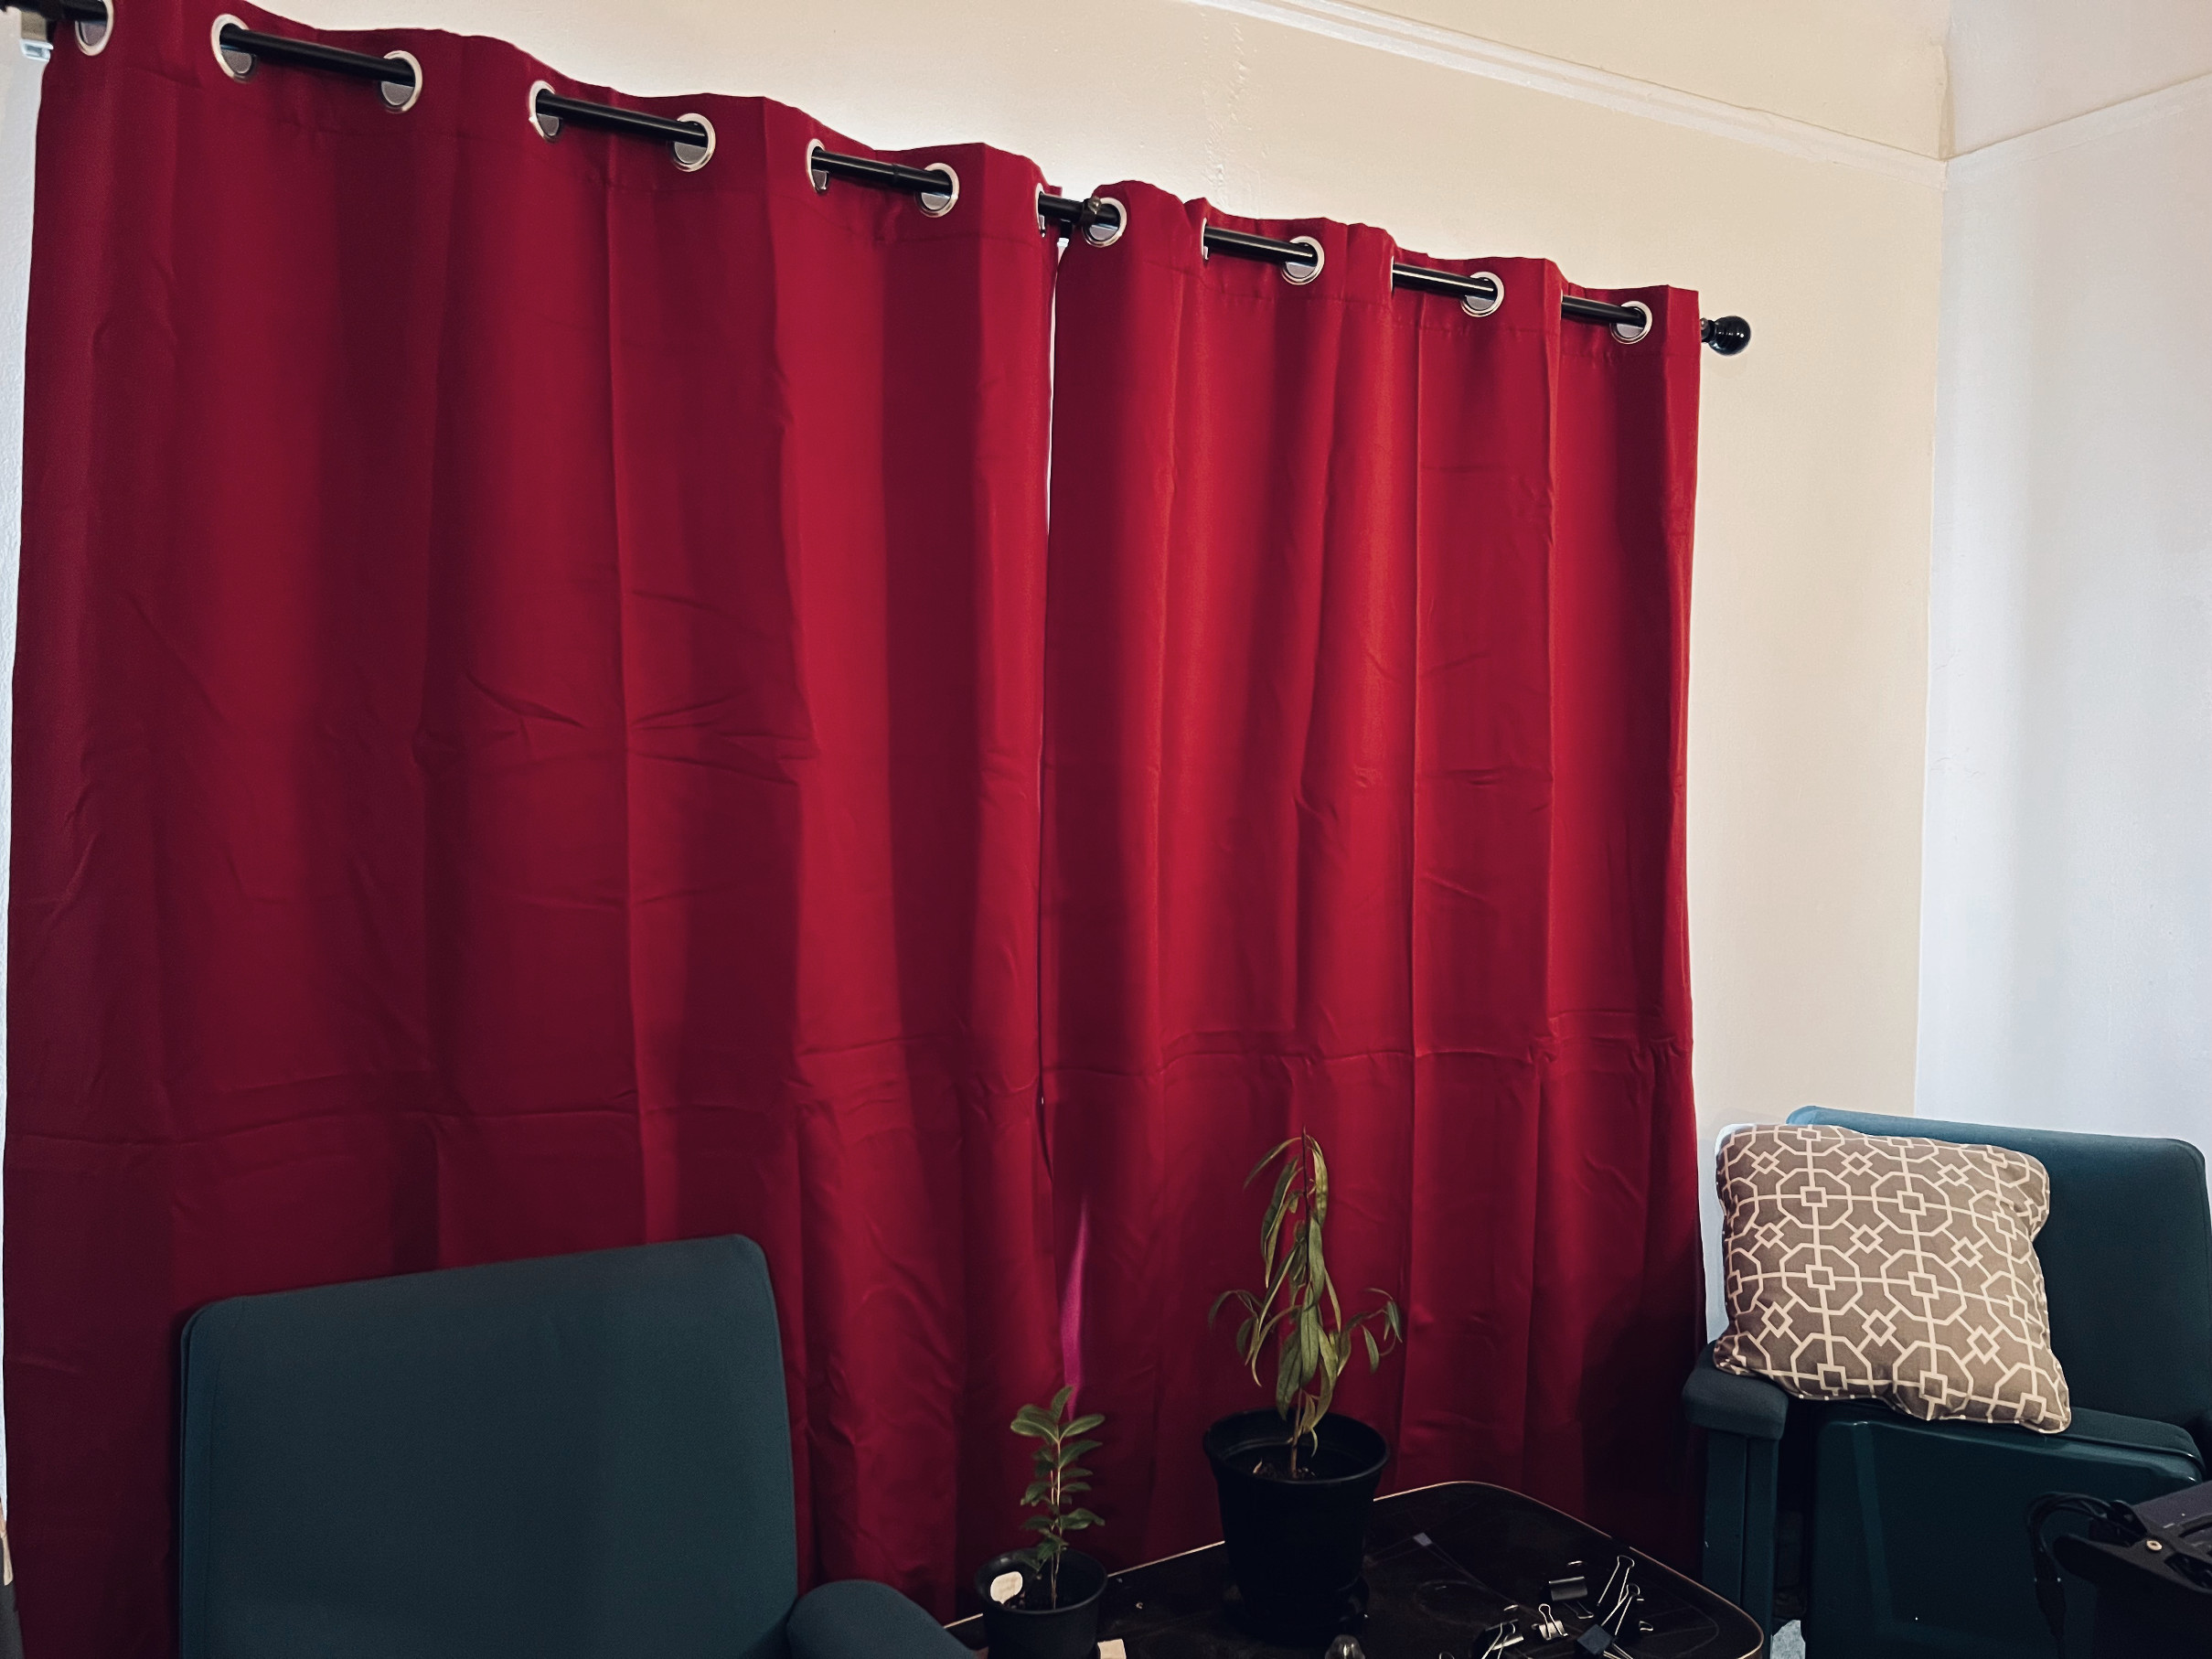 burgundy curtains bright pop of color NoNo Brackets Rental Friendly Upgrades Curtains Lifestyle Design Those Someday Goals